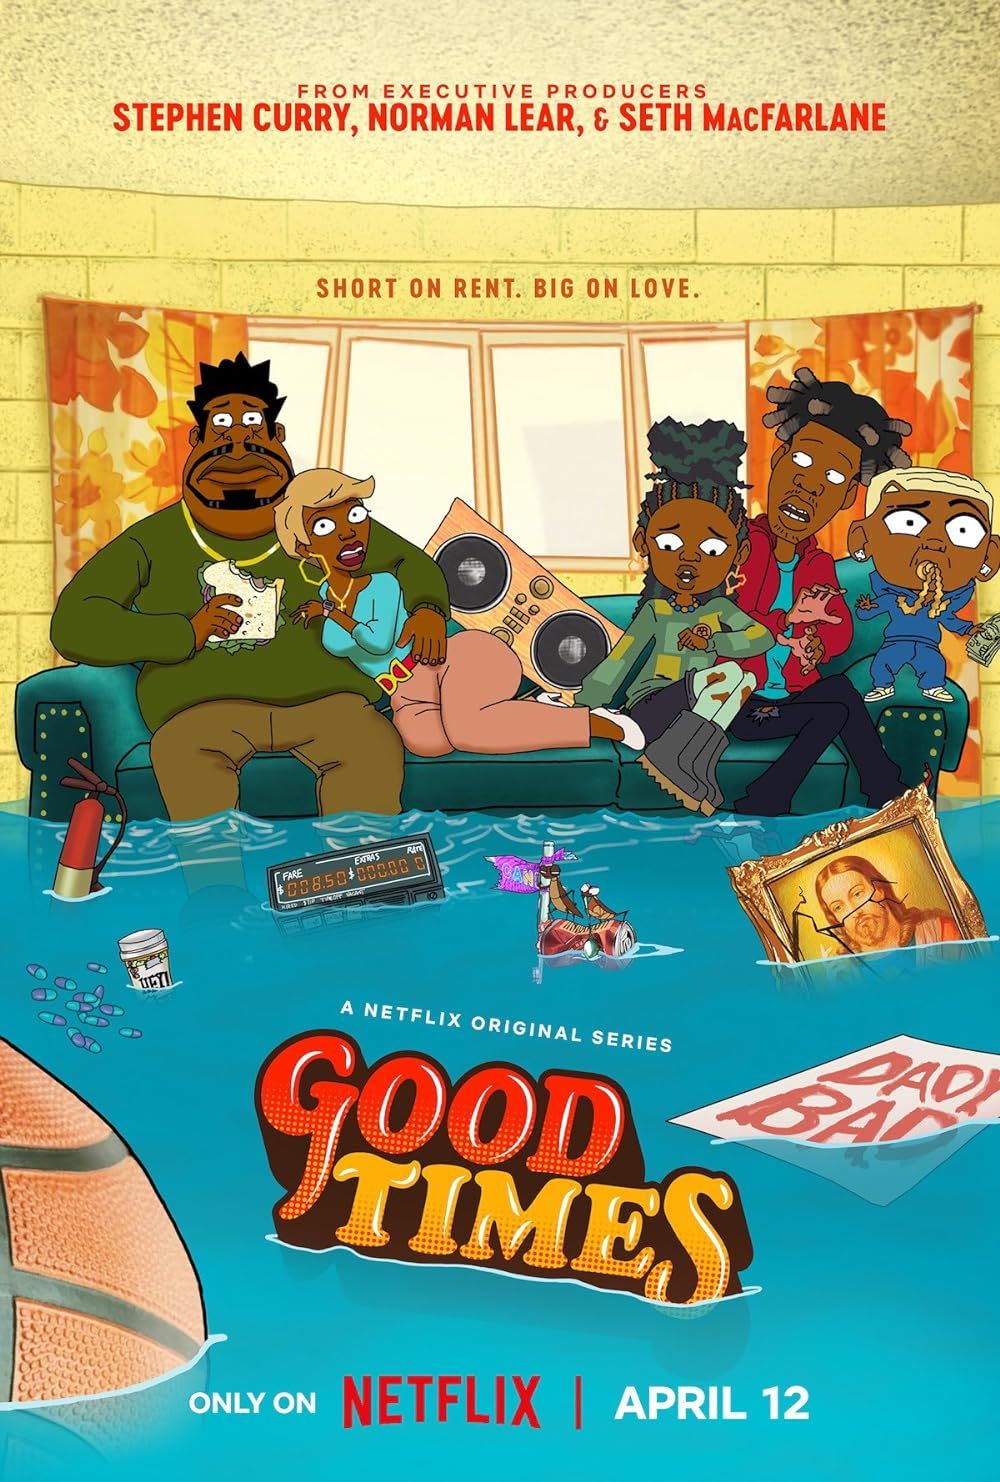 Good Times Animated Series Poster Showing a Family Sitting on a Couch in a Flooded House